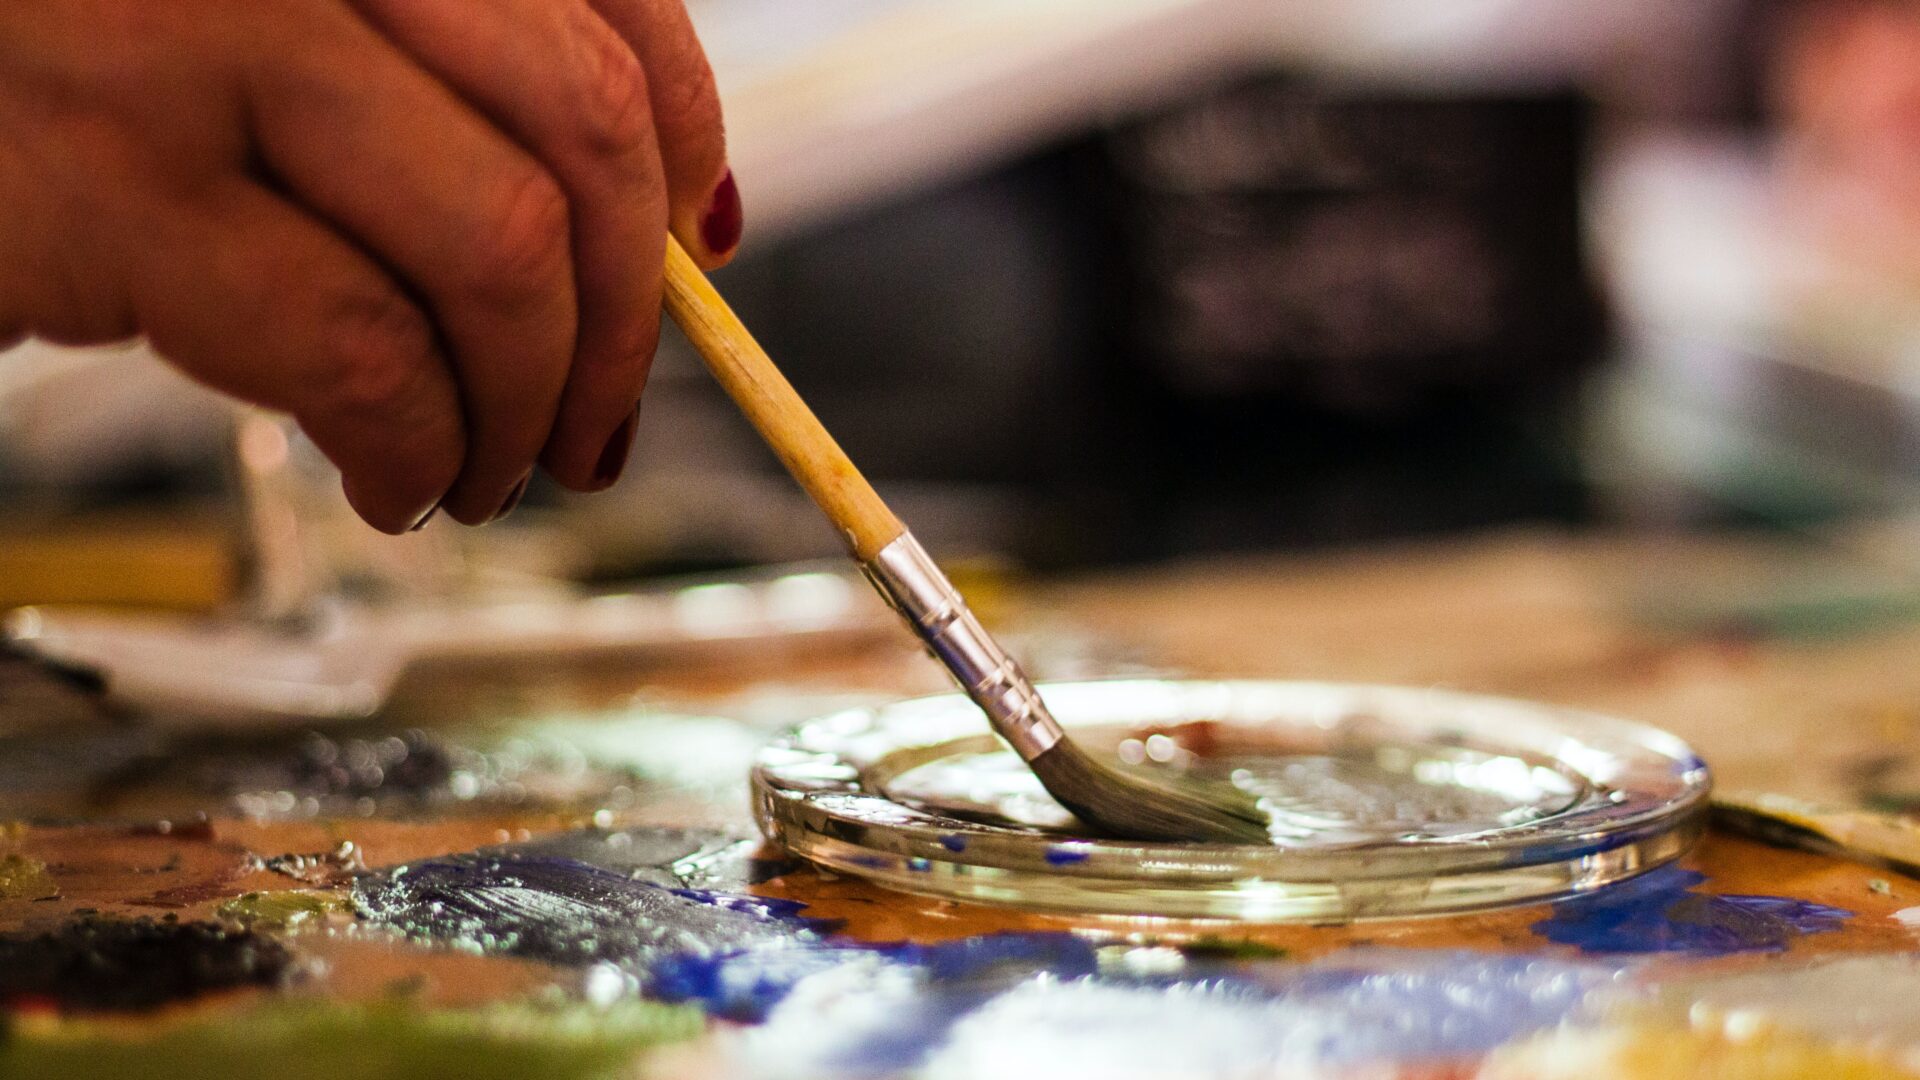 A person dips a paint brush into a glass tray.